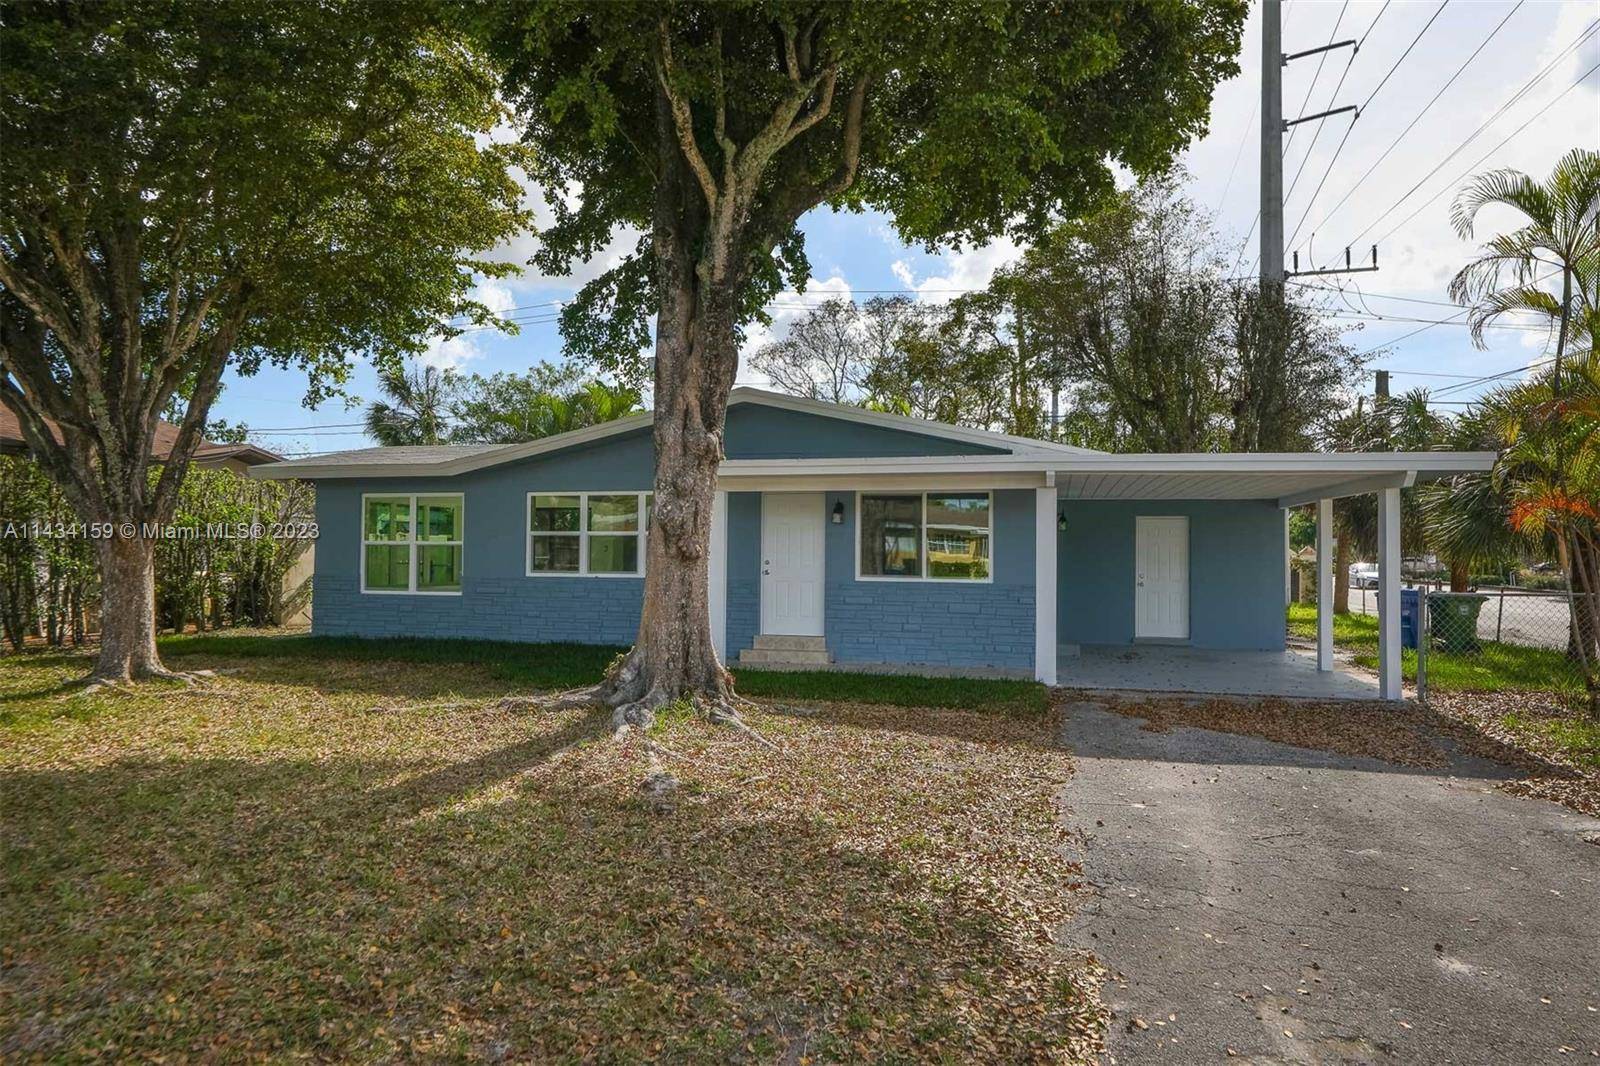 Come check out this fully remodeled home in the heart of desirable Wilton Manors.